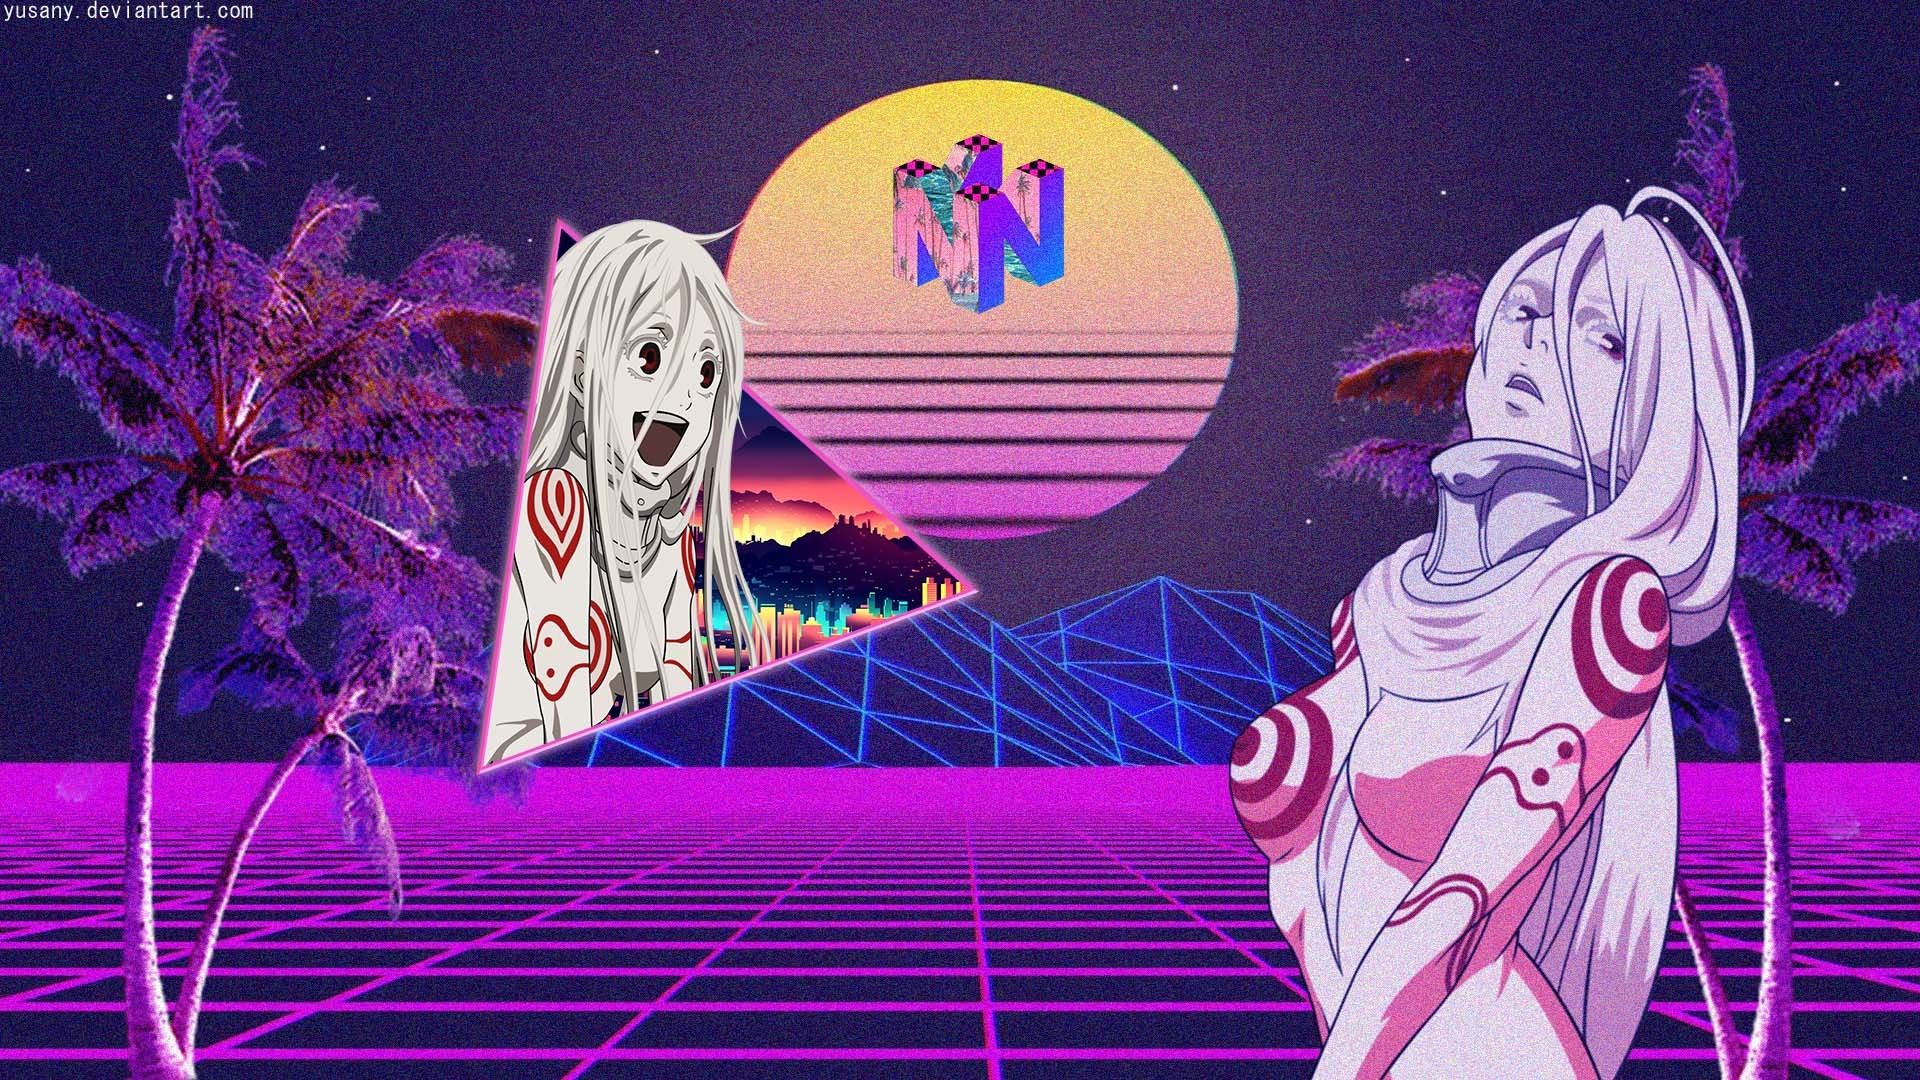 80s Anime Aesthetic Wallpapers - Wallpaper Cave